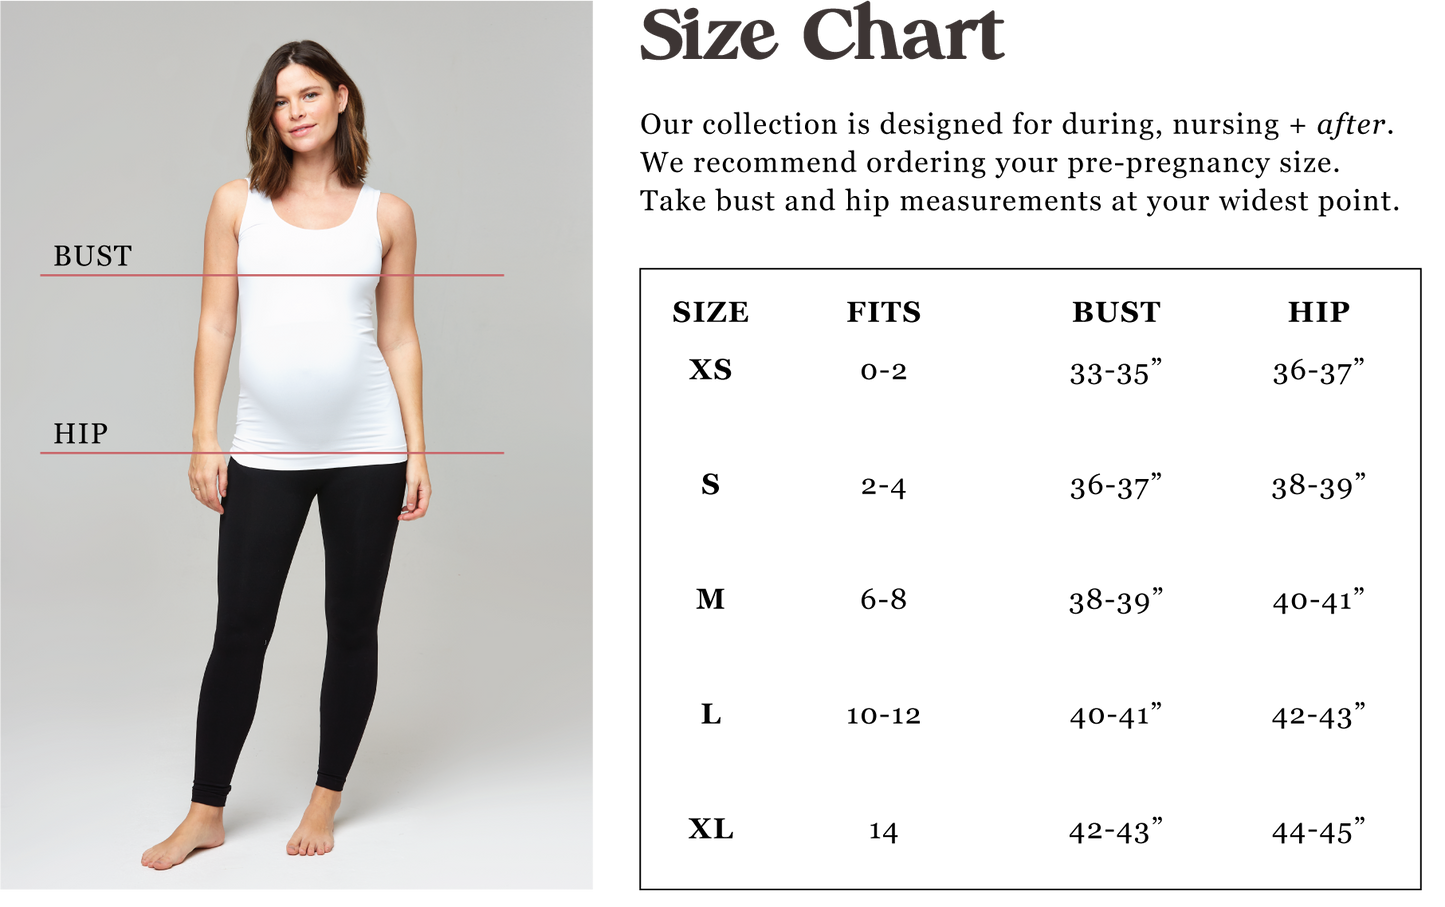 Light Seamless Support Legging – The Fourth